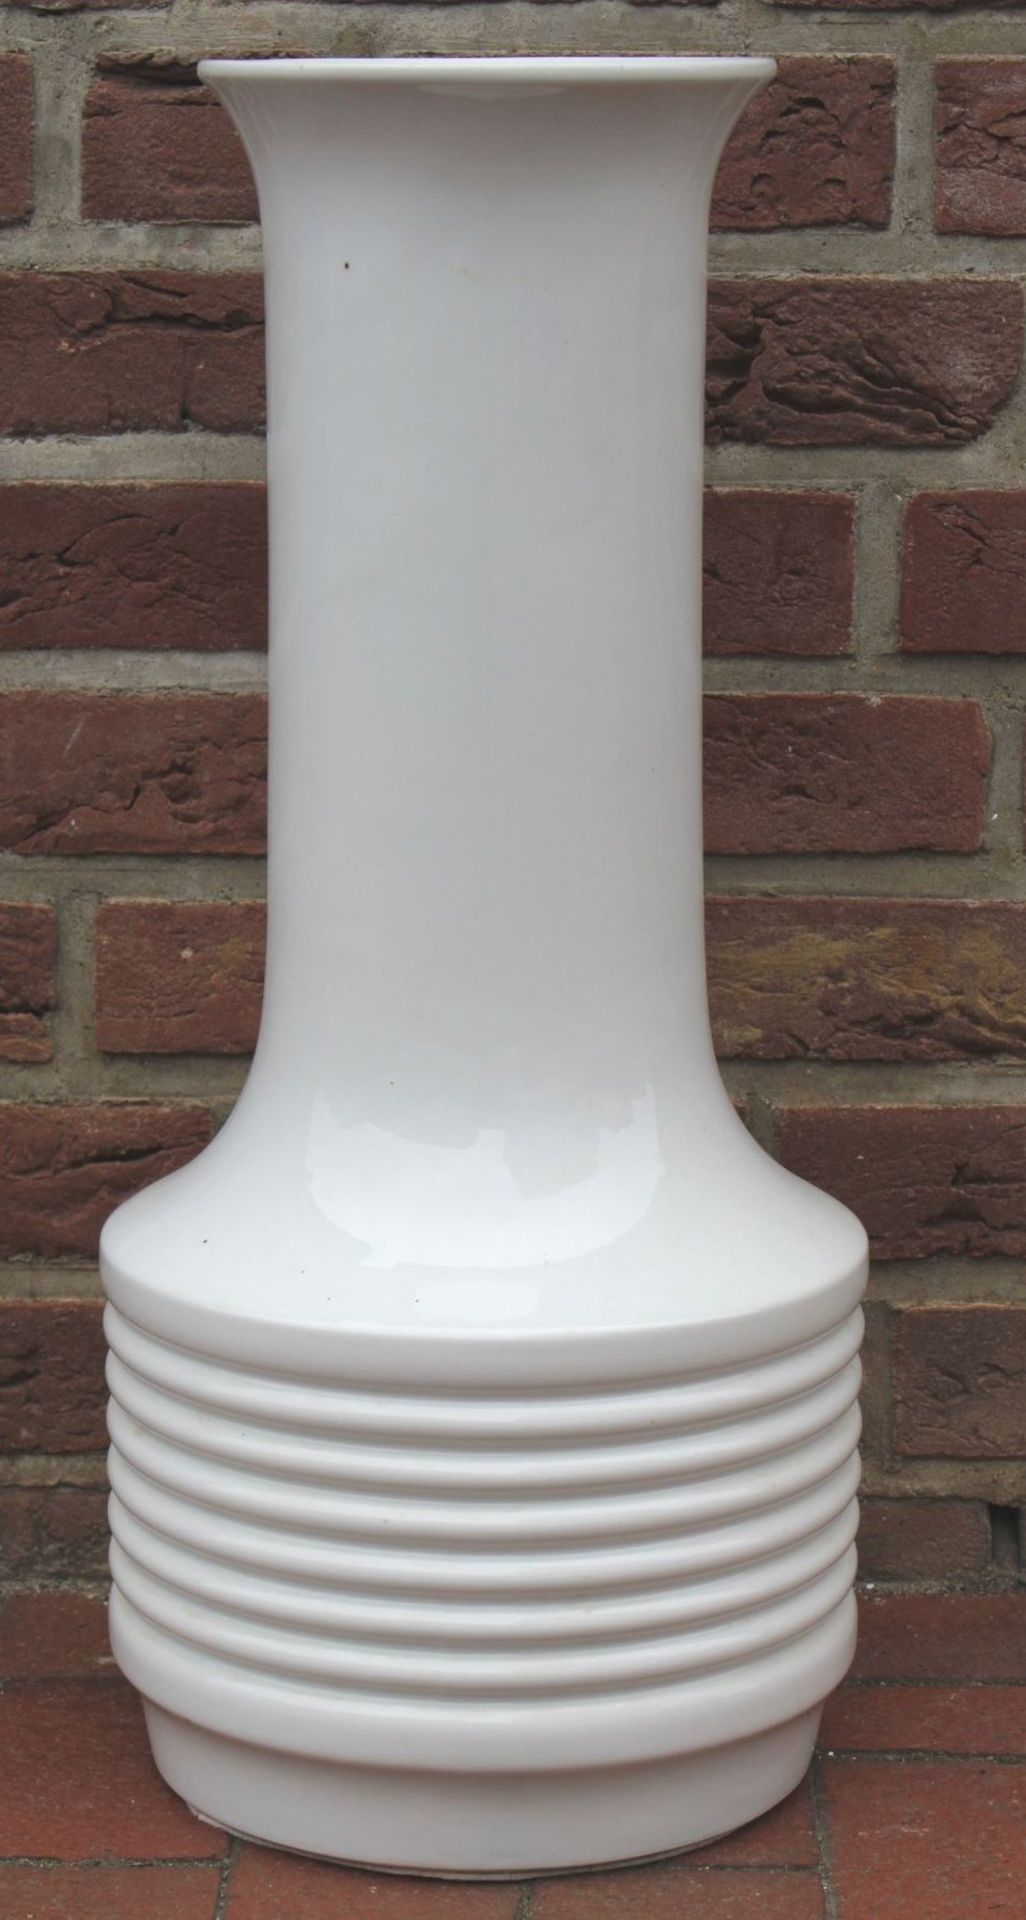 hohe Bodenvase "Arzberg" weiss, H-64 cm, D-25 cm